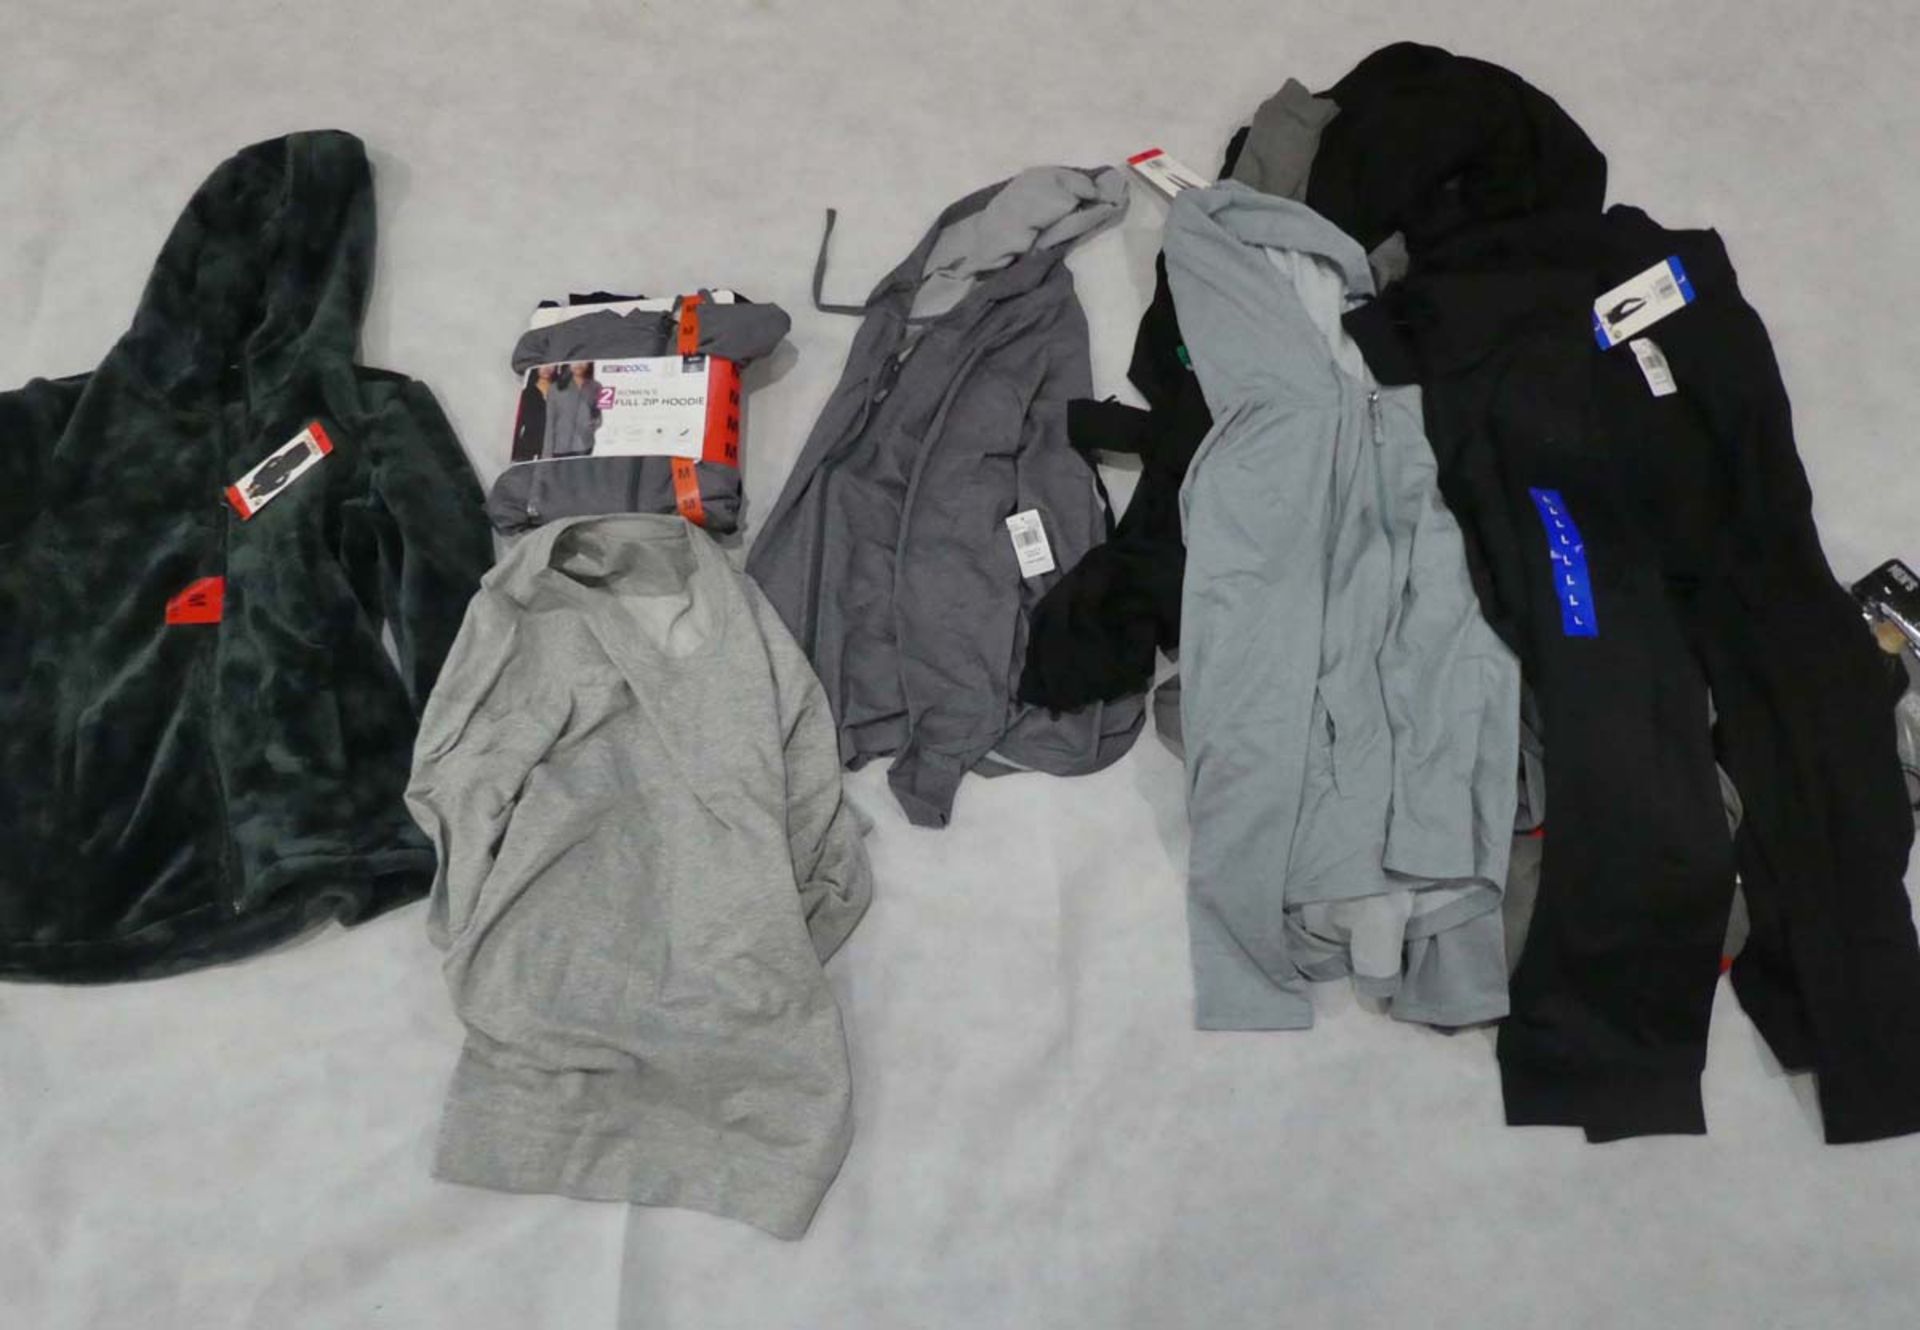 Selection of 32 degree clothing to include hoodies, fleece, t-shirts and joggers in various